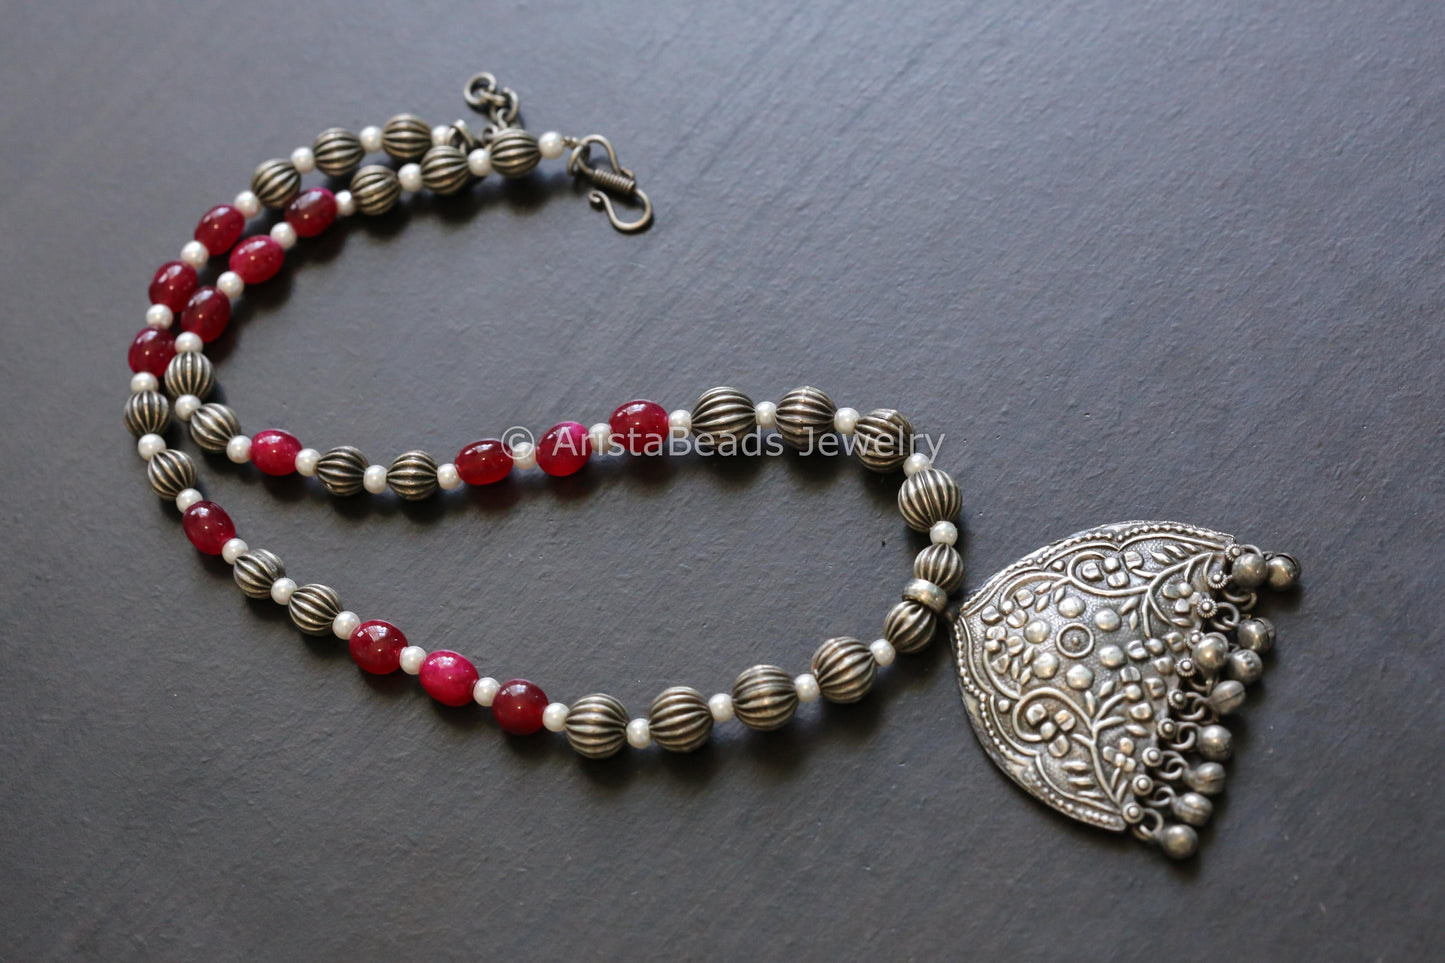 Handmade Silver Look Beaded Necklace - Style 5